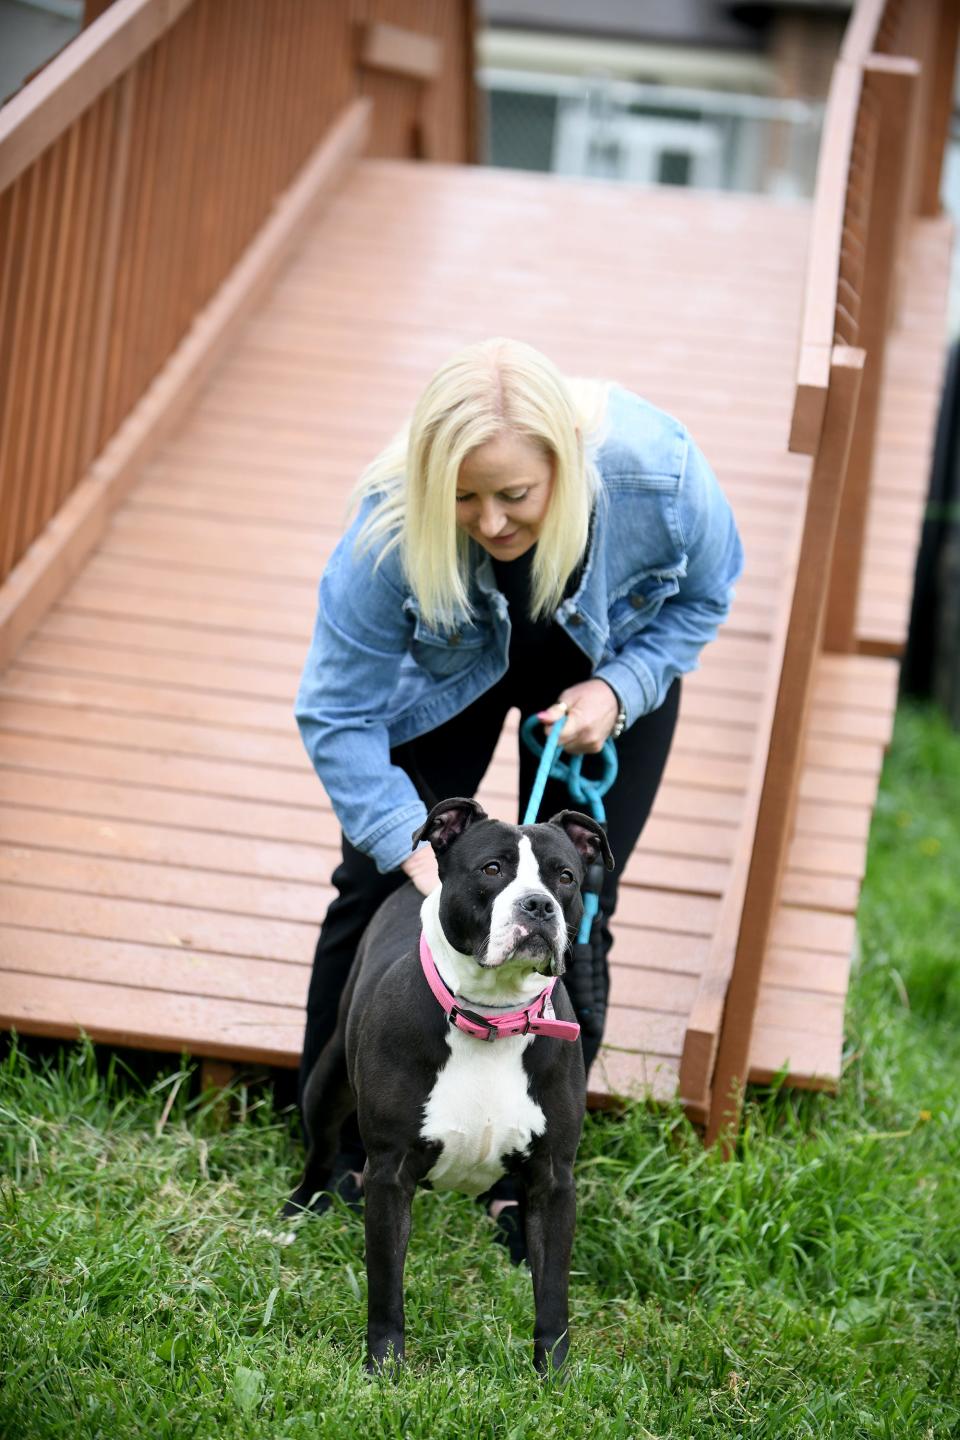 Stark County Humane Society Executive Director Jackie Godbey with rescue dog Baby Girl on an agility course created by GlenOak sophomore Jacob Price for his Eagle Scout project.